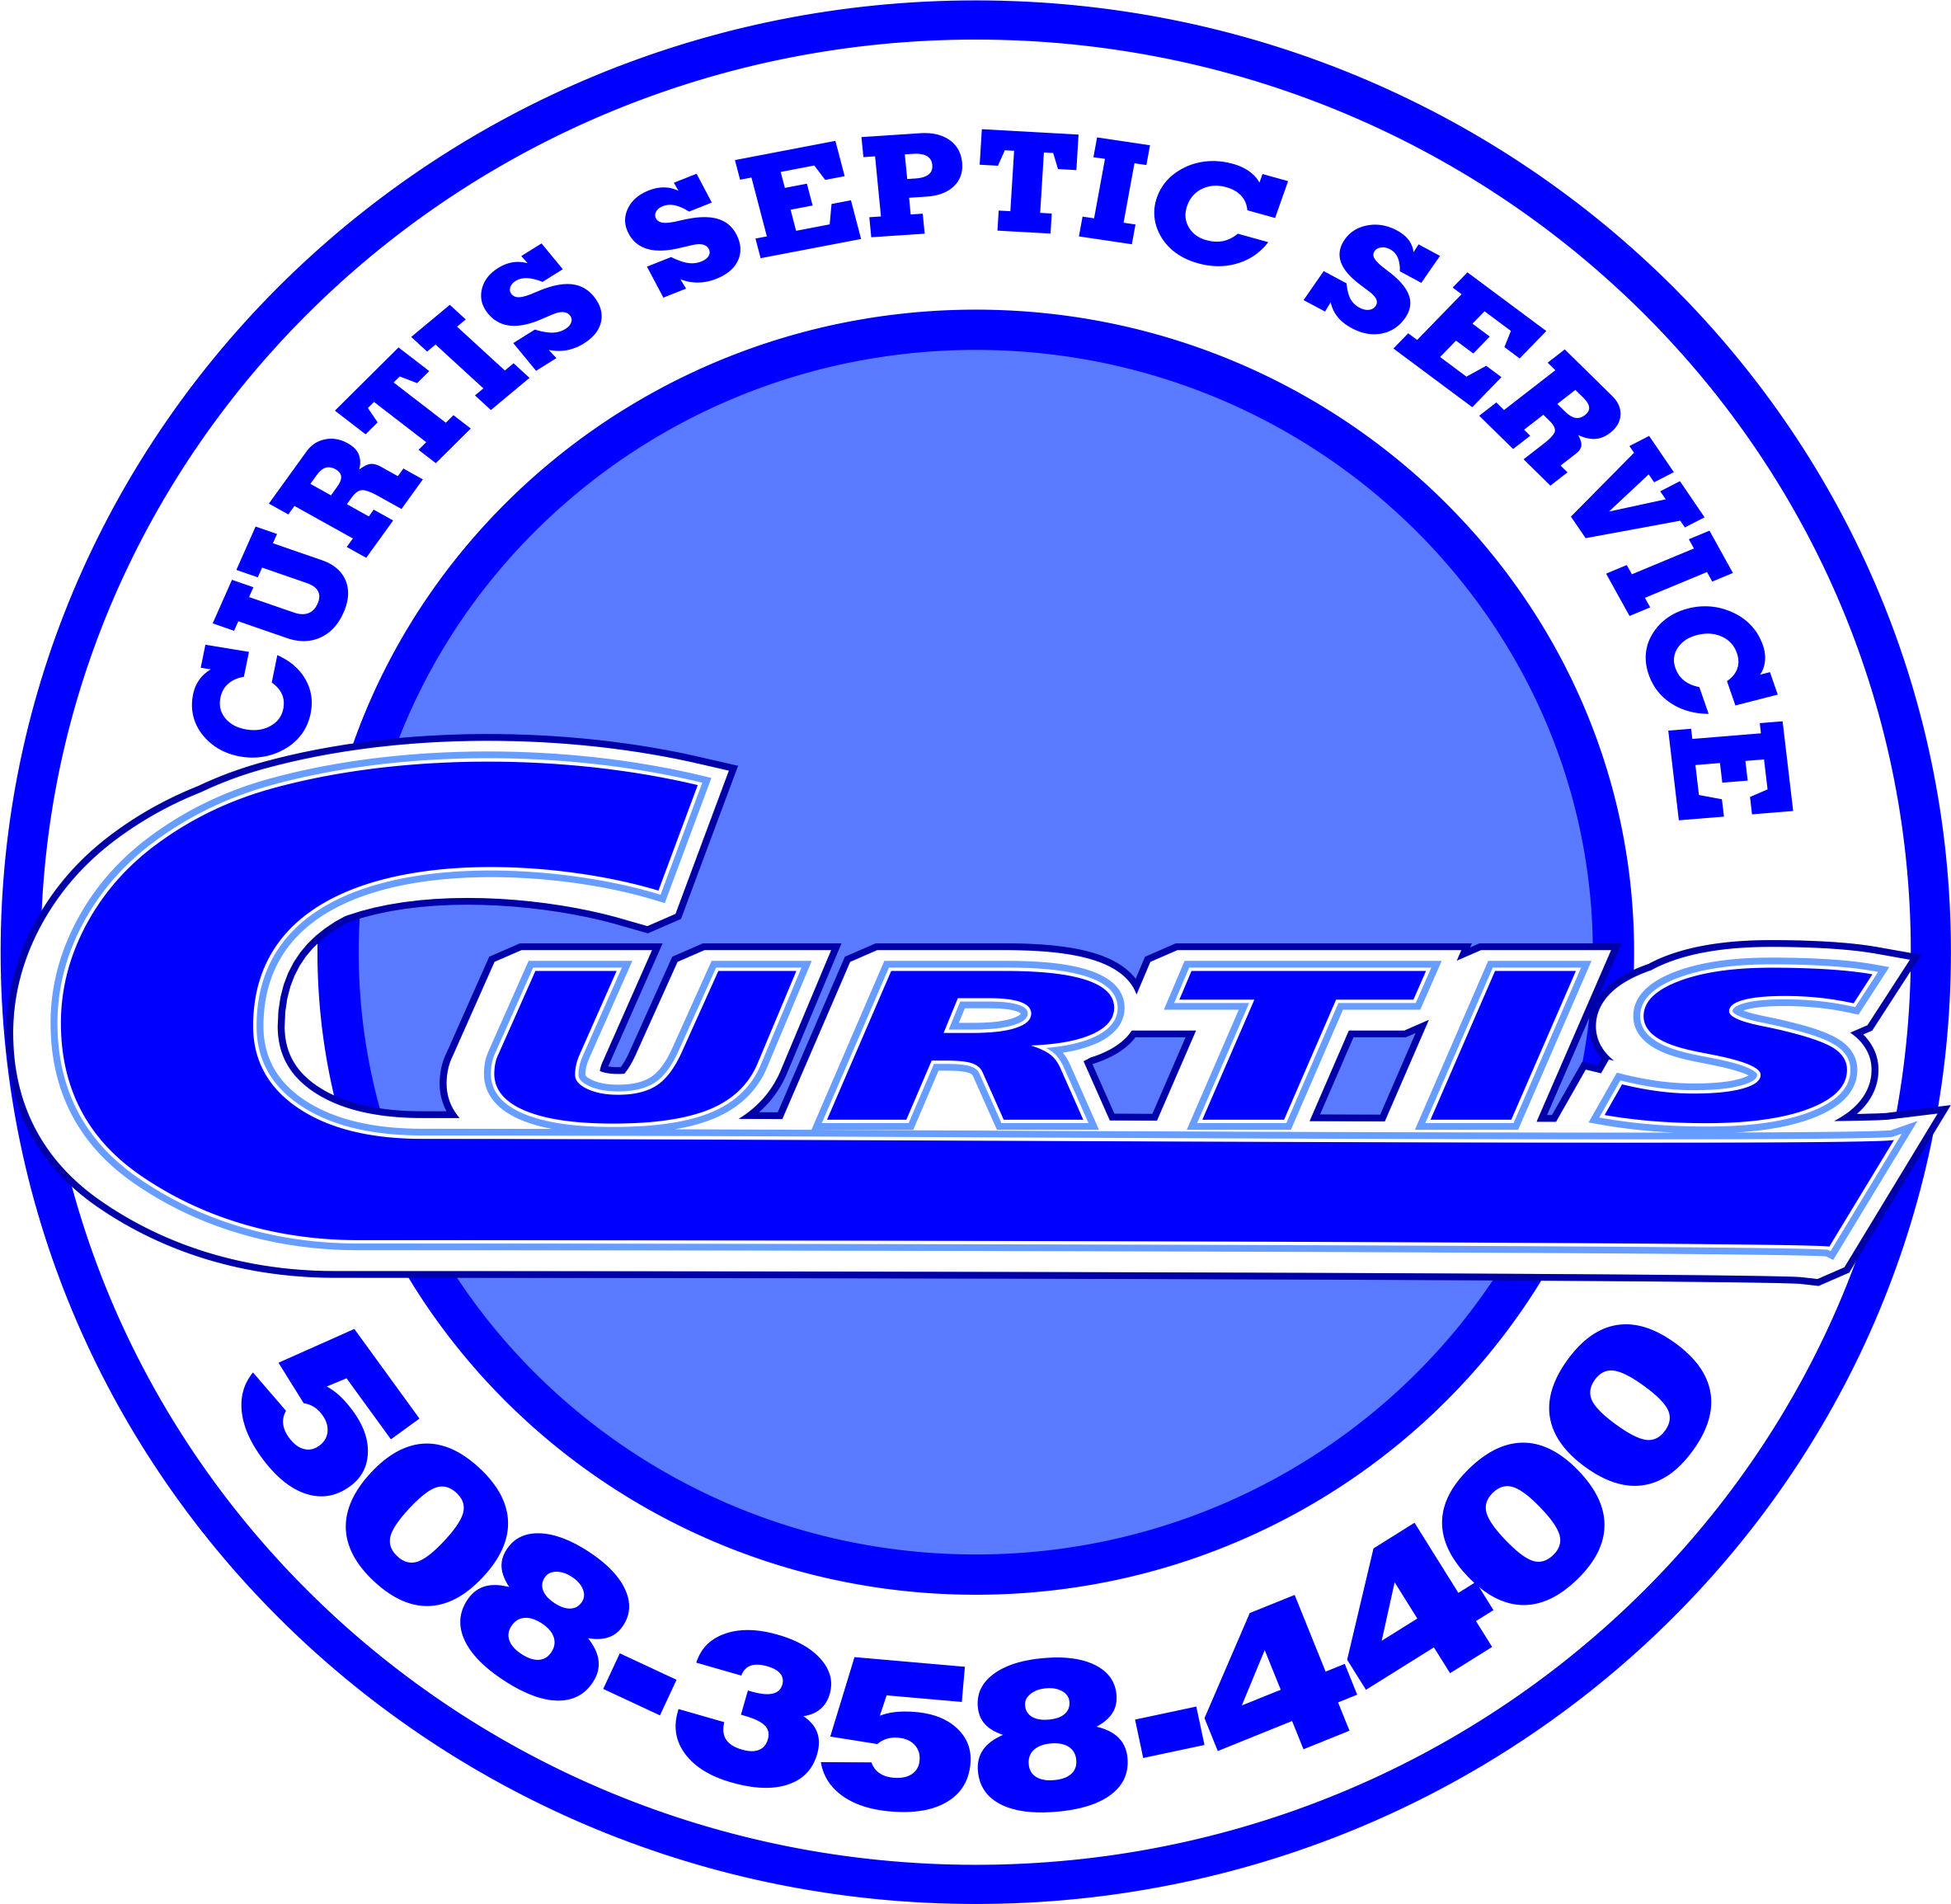 Septic system inspectors in New Braintree, MA.